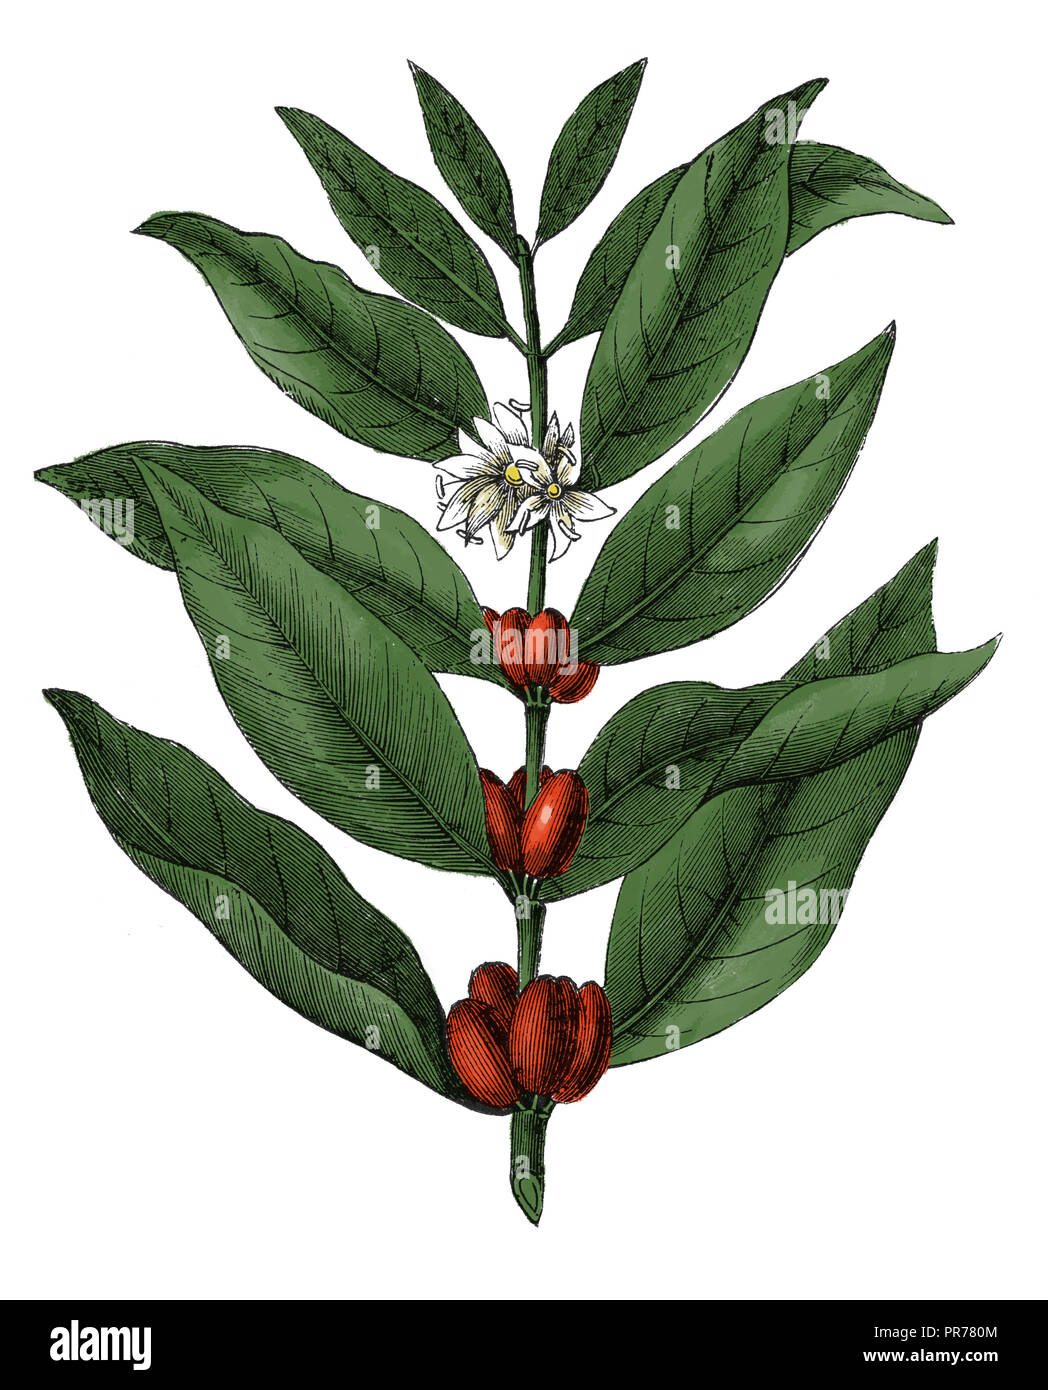 19th century illustration of Coffea arabica, known as coffee shrub of Arabia, mountain coffee or arabica coffee. Published in Systematischer Bilder- Stock Photo